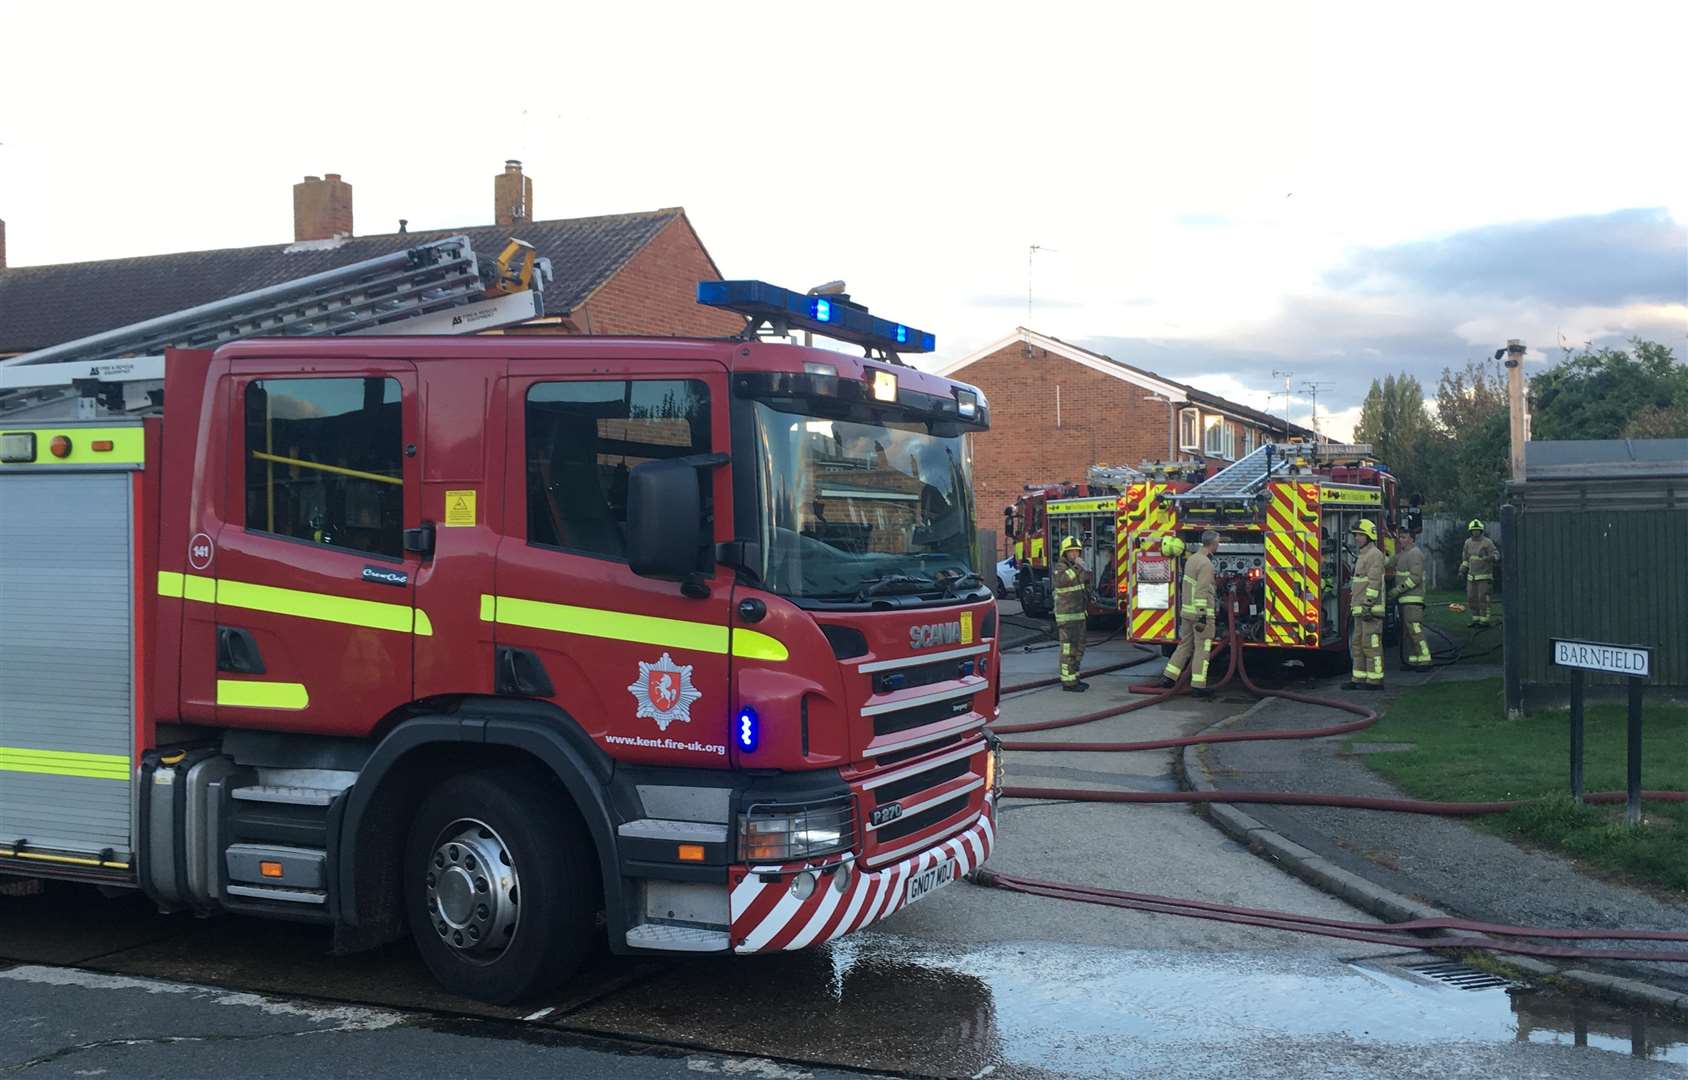 At least three homes have been affected by the fire